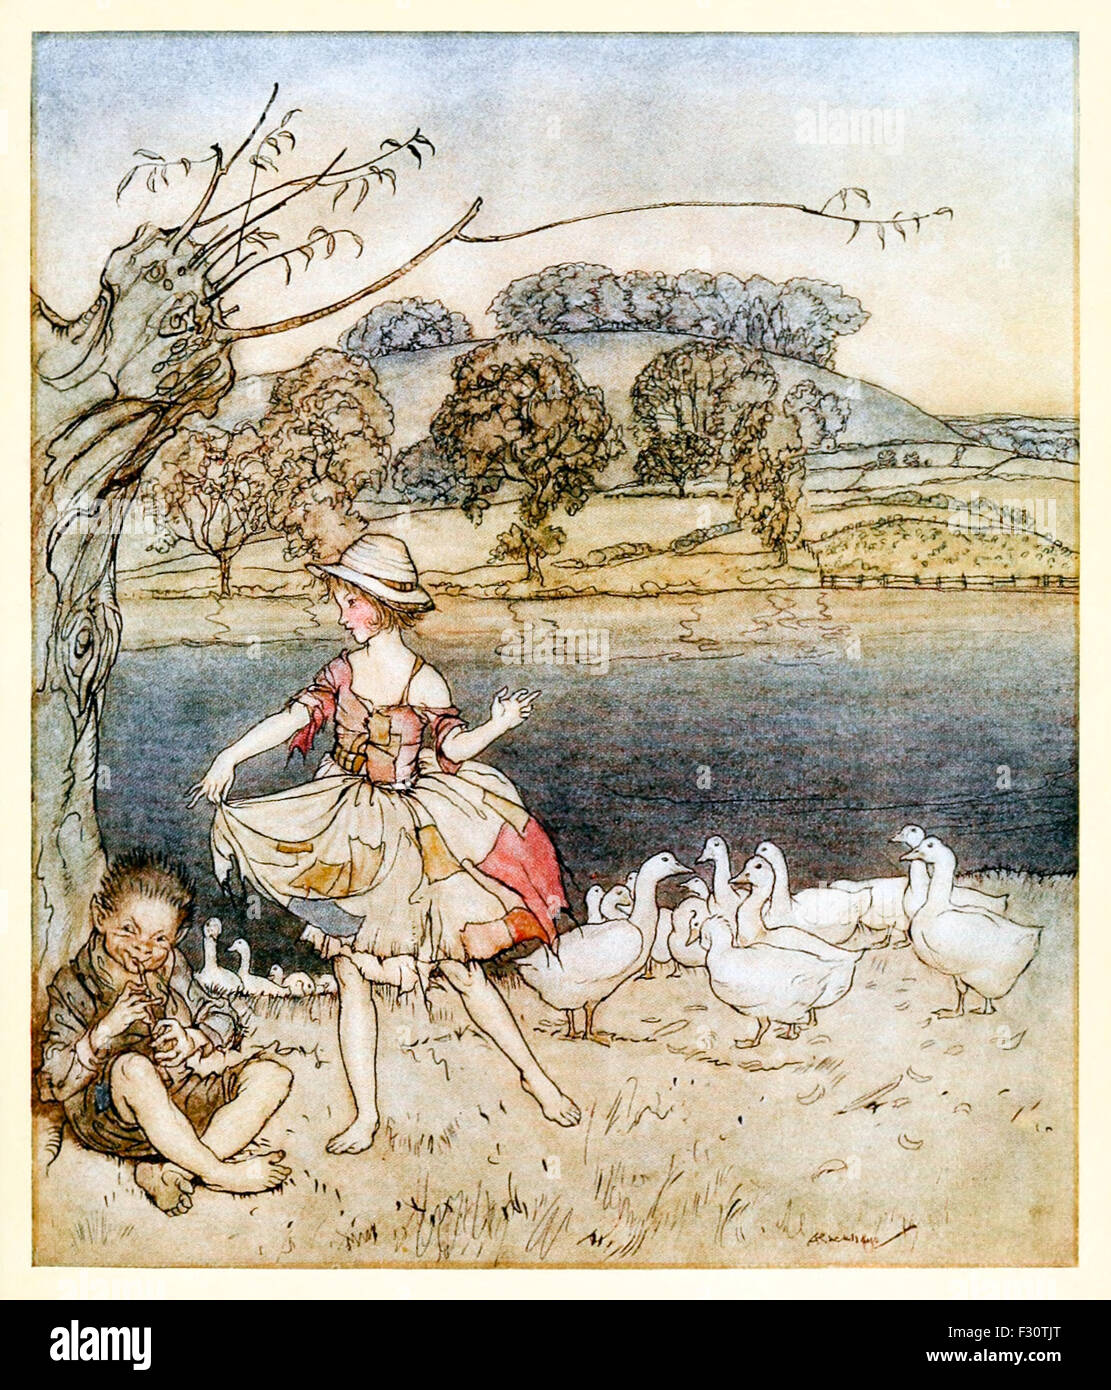 'Tattercoats dancing while the gooseherd pipes.' from 'Tattercoat' in 'English Fairy Tales', illustration by Arthur Rackham (1867-1939). See description for more information. Stock Photo